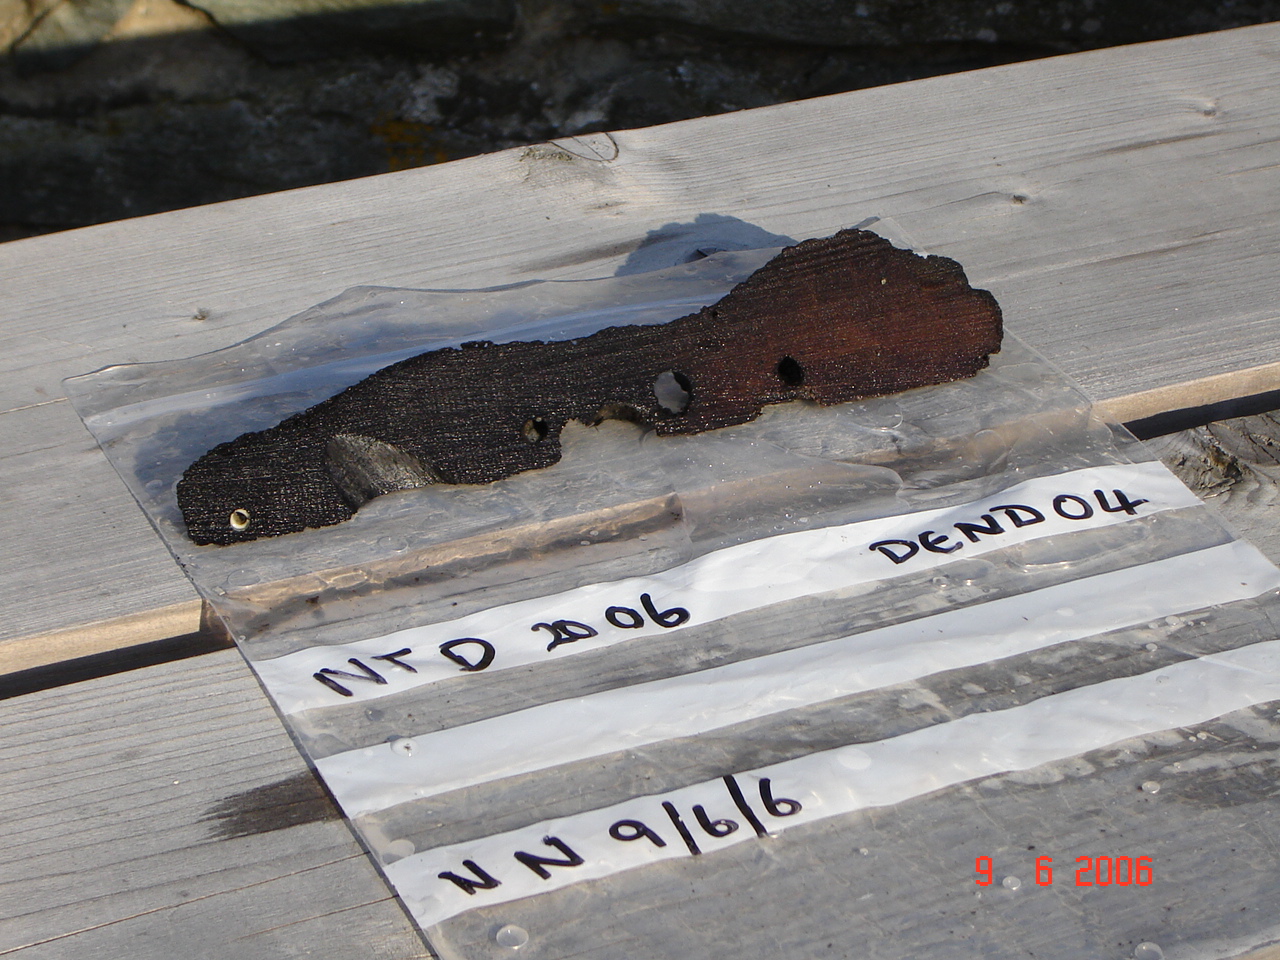 Example of a wedge sample removed from one of the main frames 